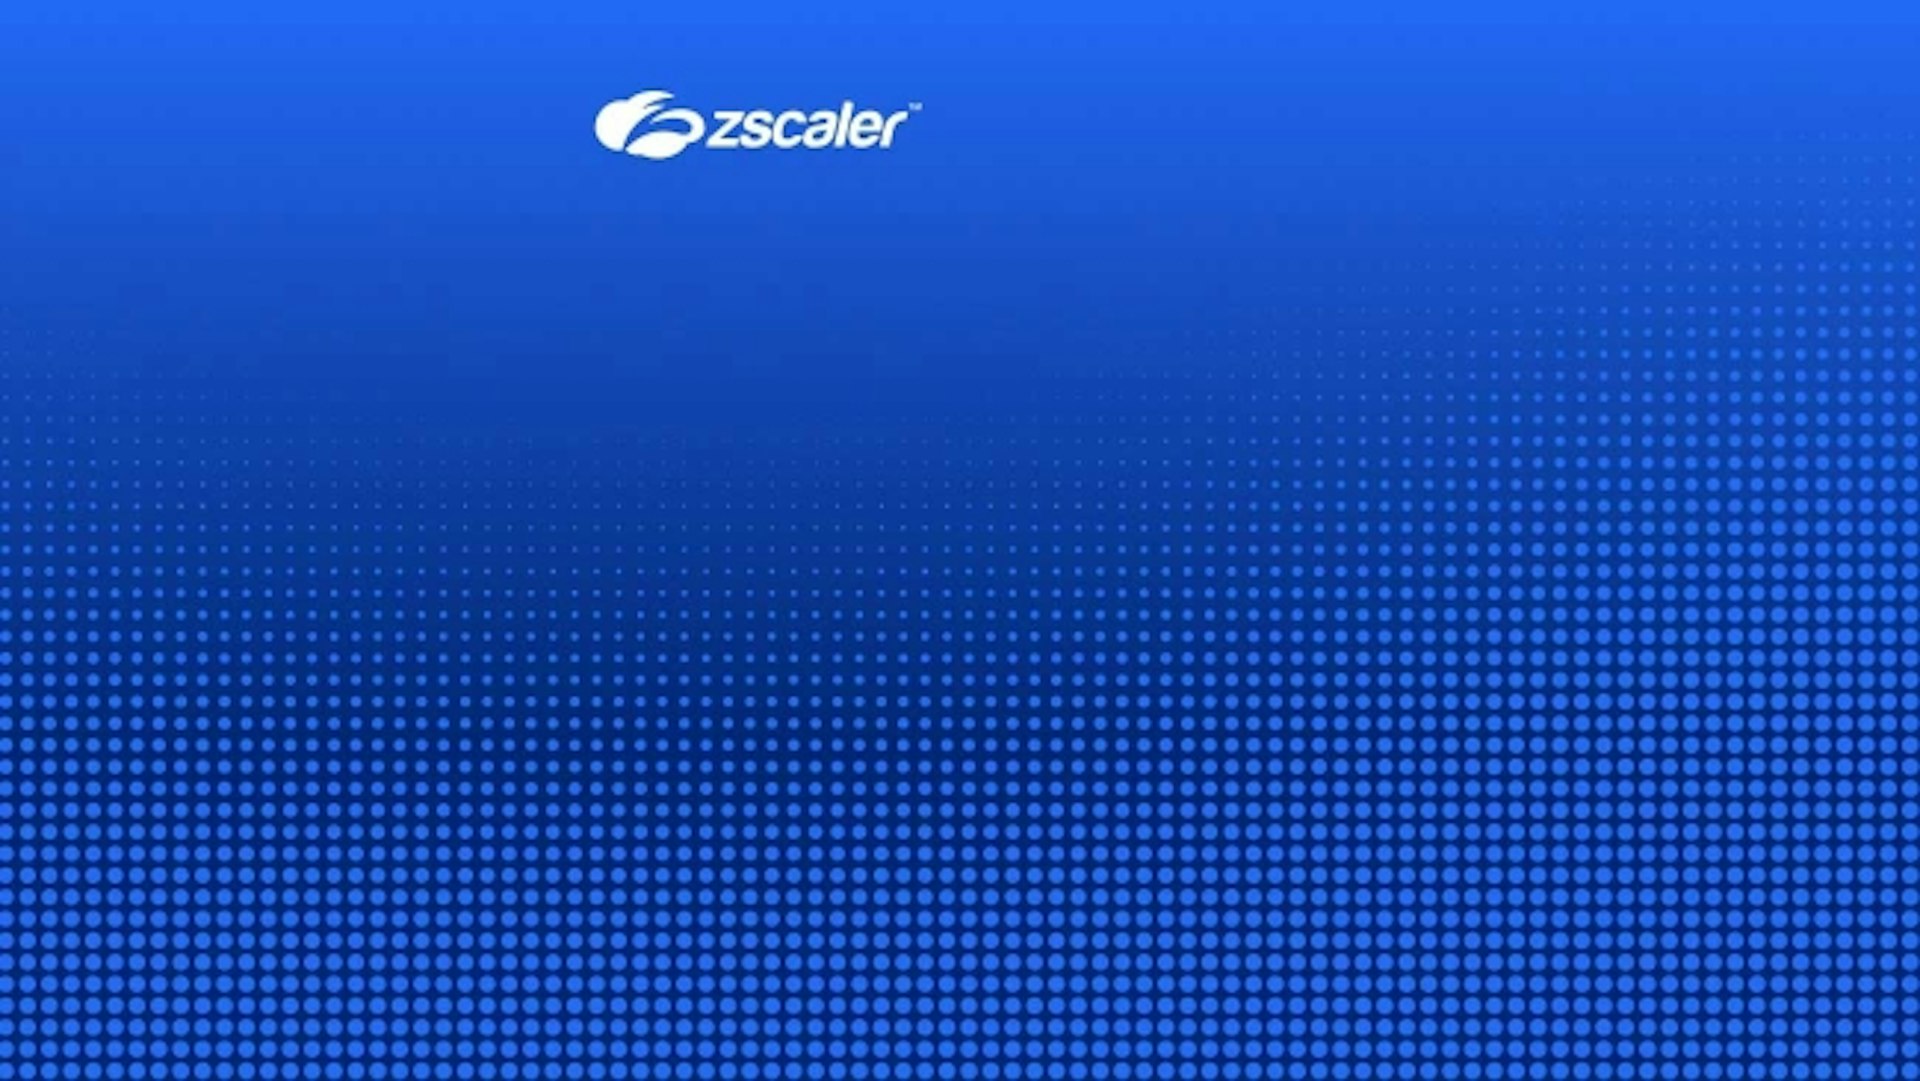 CSM Bakery Relies On Zscaler Private Access